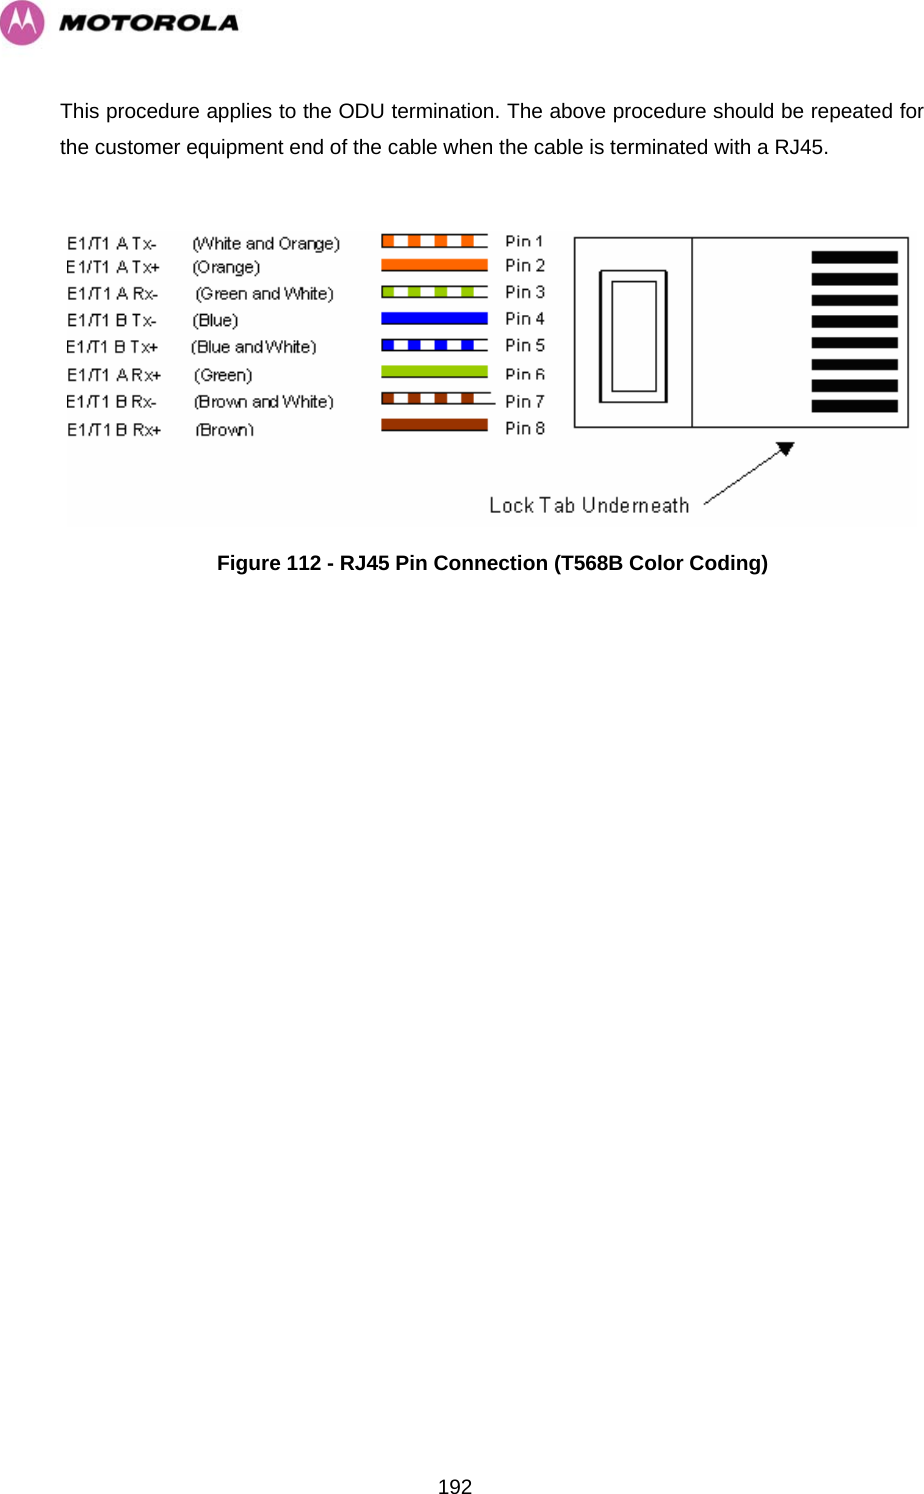   192This procedure applies to the ODU termination. The above procedure should be repeated for the customer equipment end of the cable when the cable is terminated with a RJ45.   Figure 112 - RJ45 Pin Connection (T568B Color Coding) 